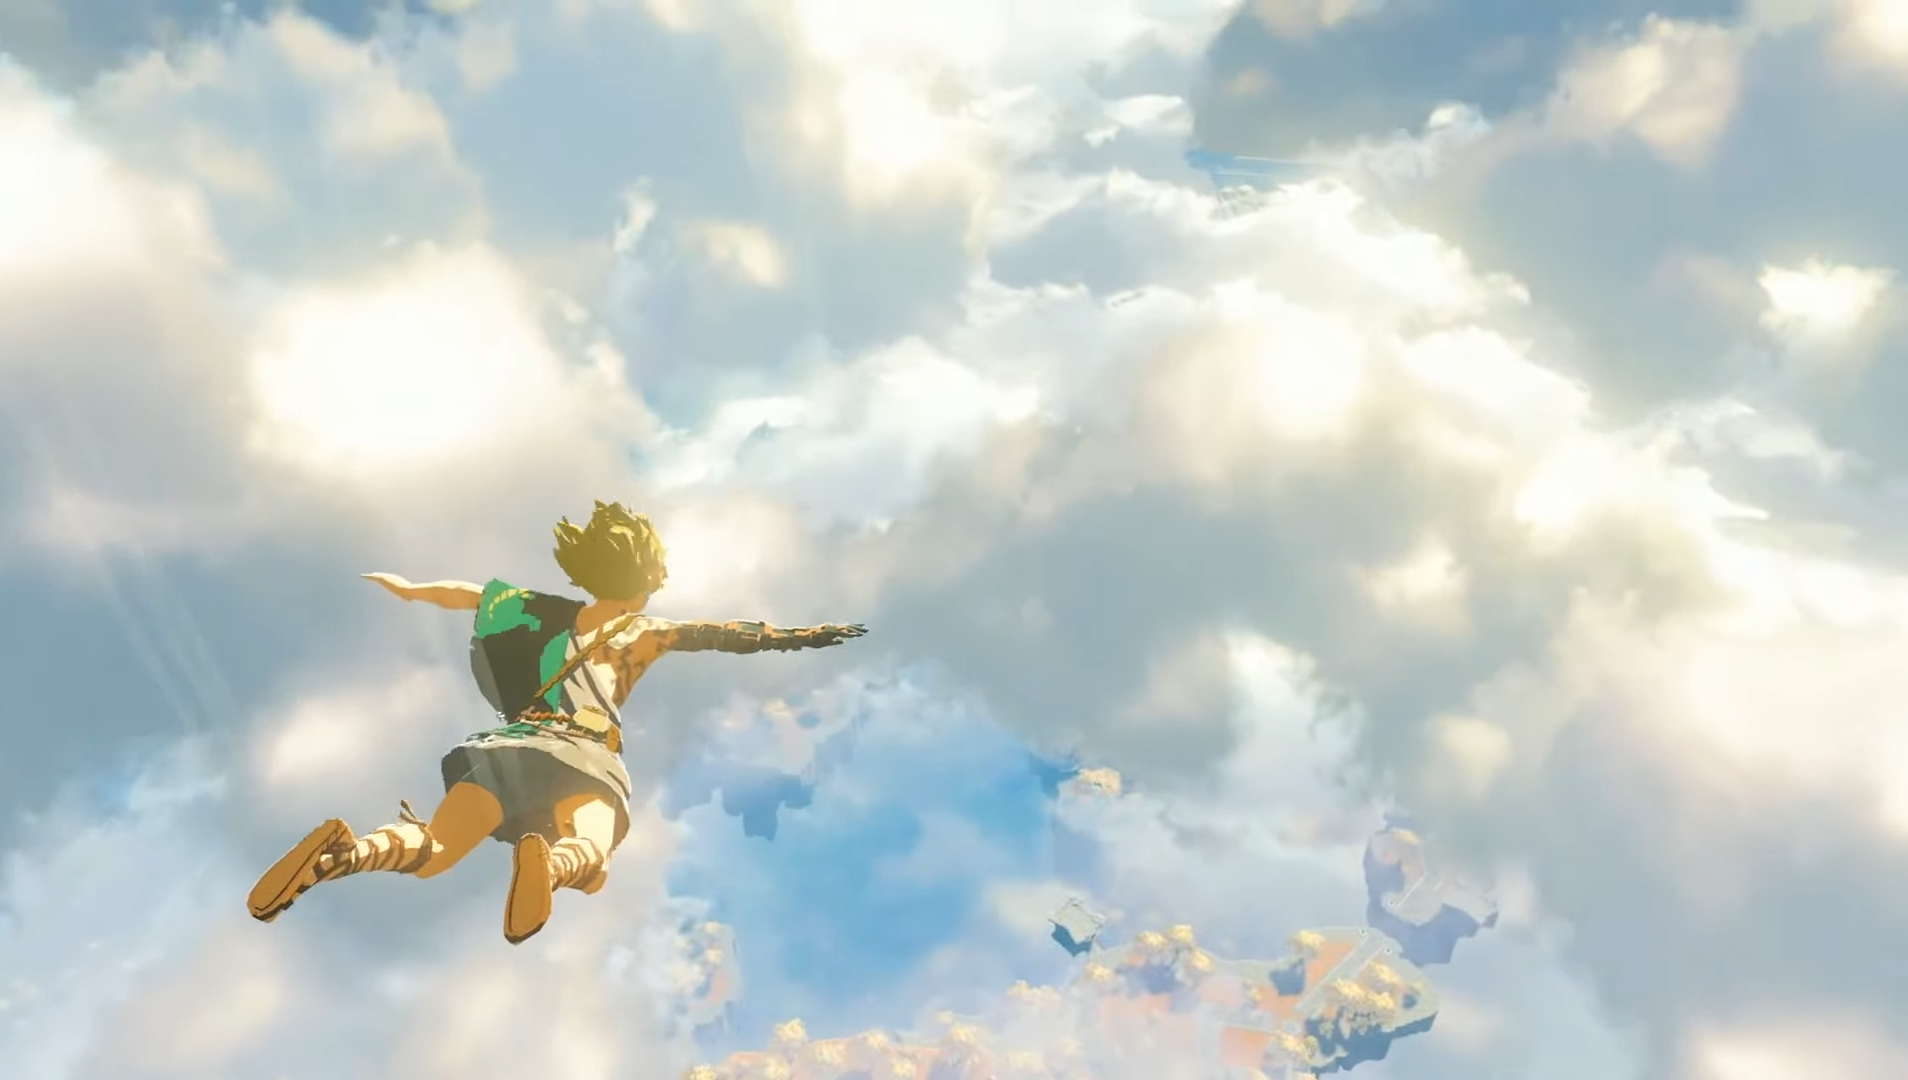 Sequel to The Legend of Zelda: Breath of the Wild - E3 2021 Teaser